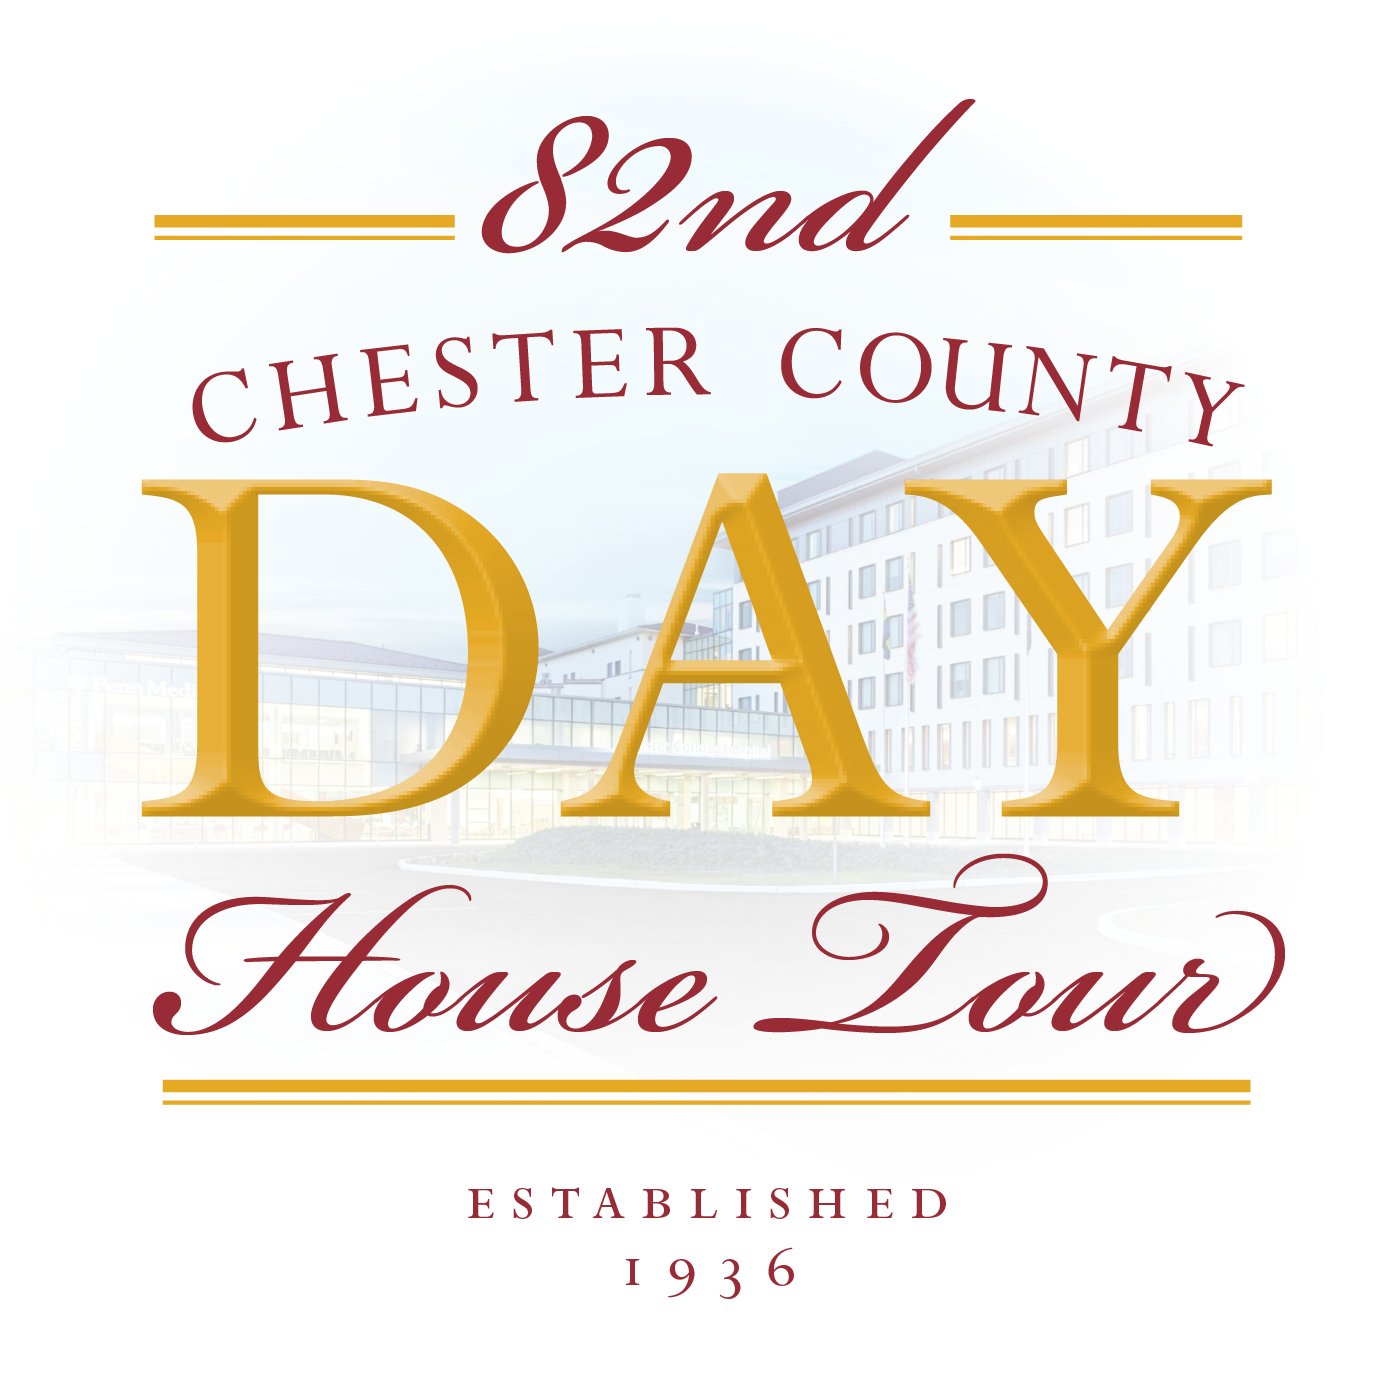 Sycamore & Stone Farm is part of the Chester County House Tour Showit